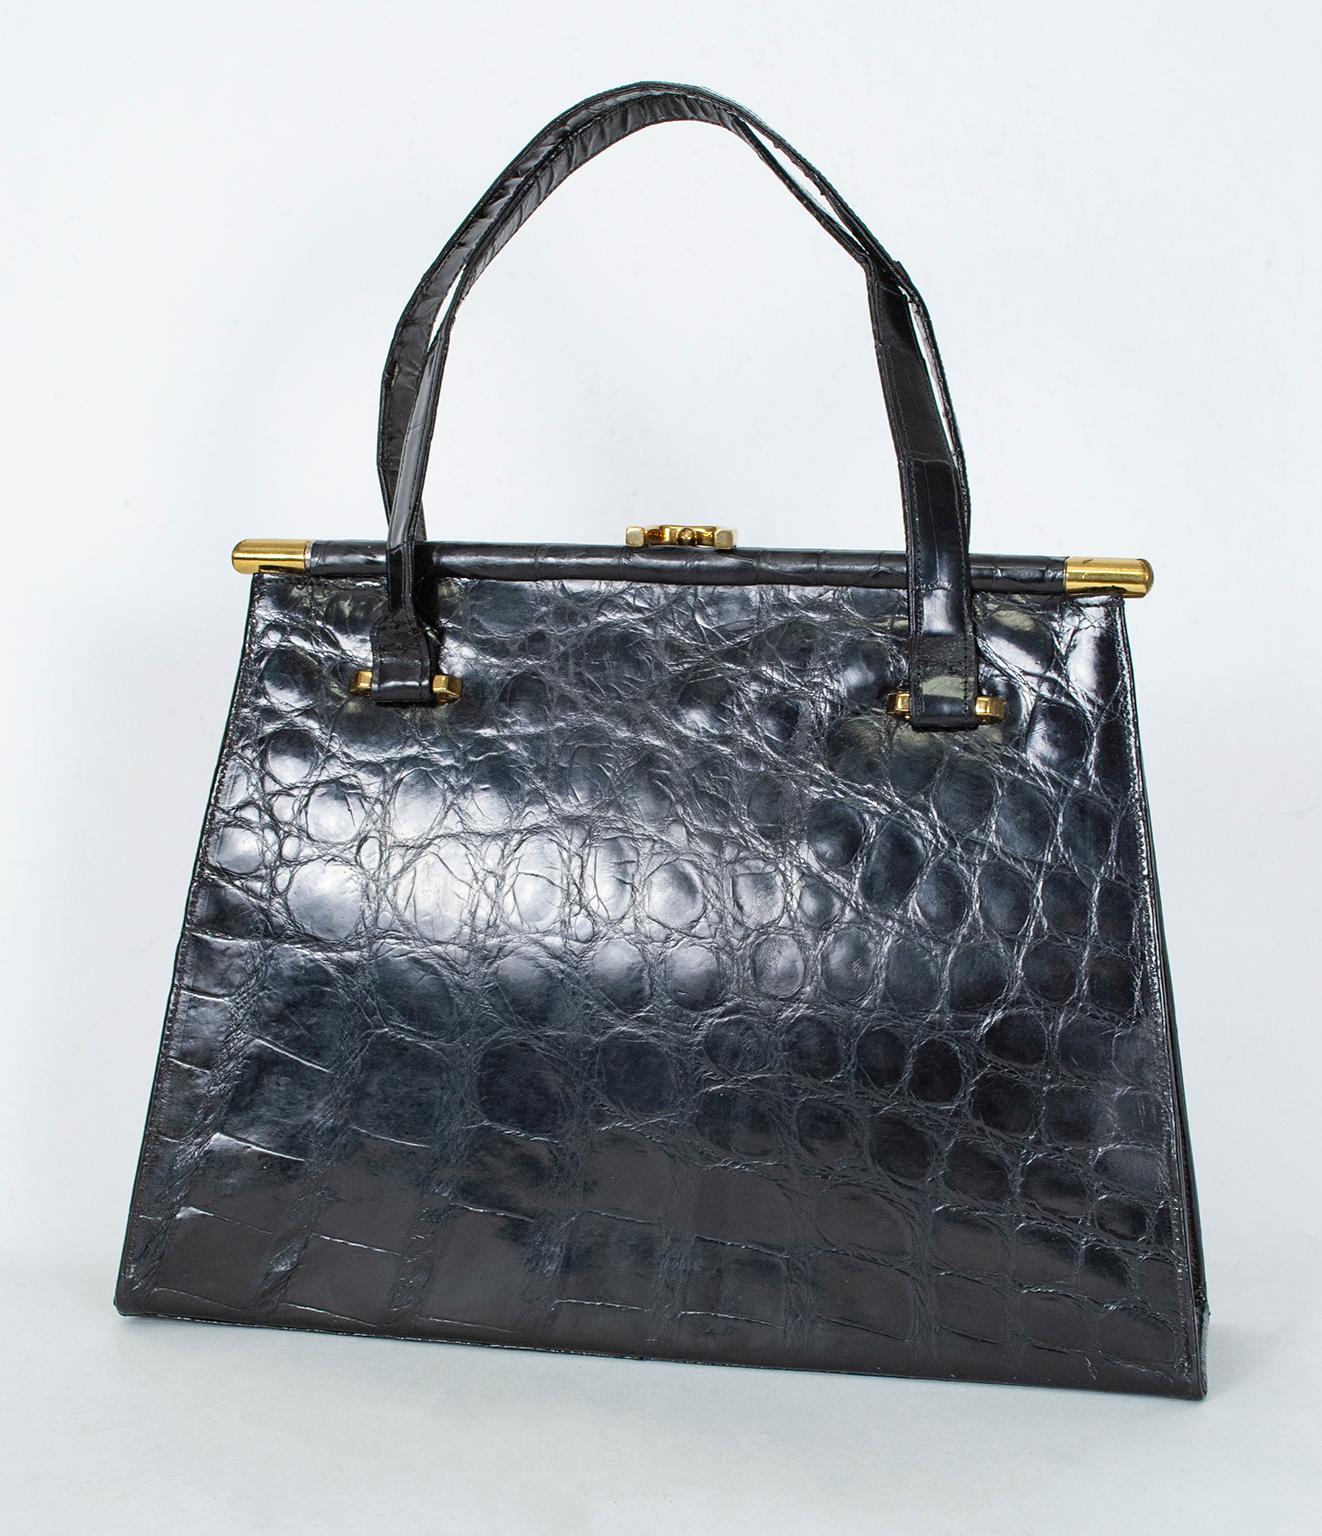 An icon of mid-century style, this classic geometric handbag not only has the shape that toasted the times, but a unique gold dowel-style top frame and a lucky horseshoe clasp. There’s even a matching coin purse!

Gloss black alligator handbag with